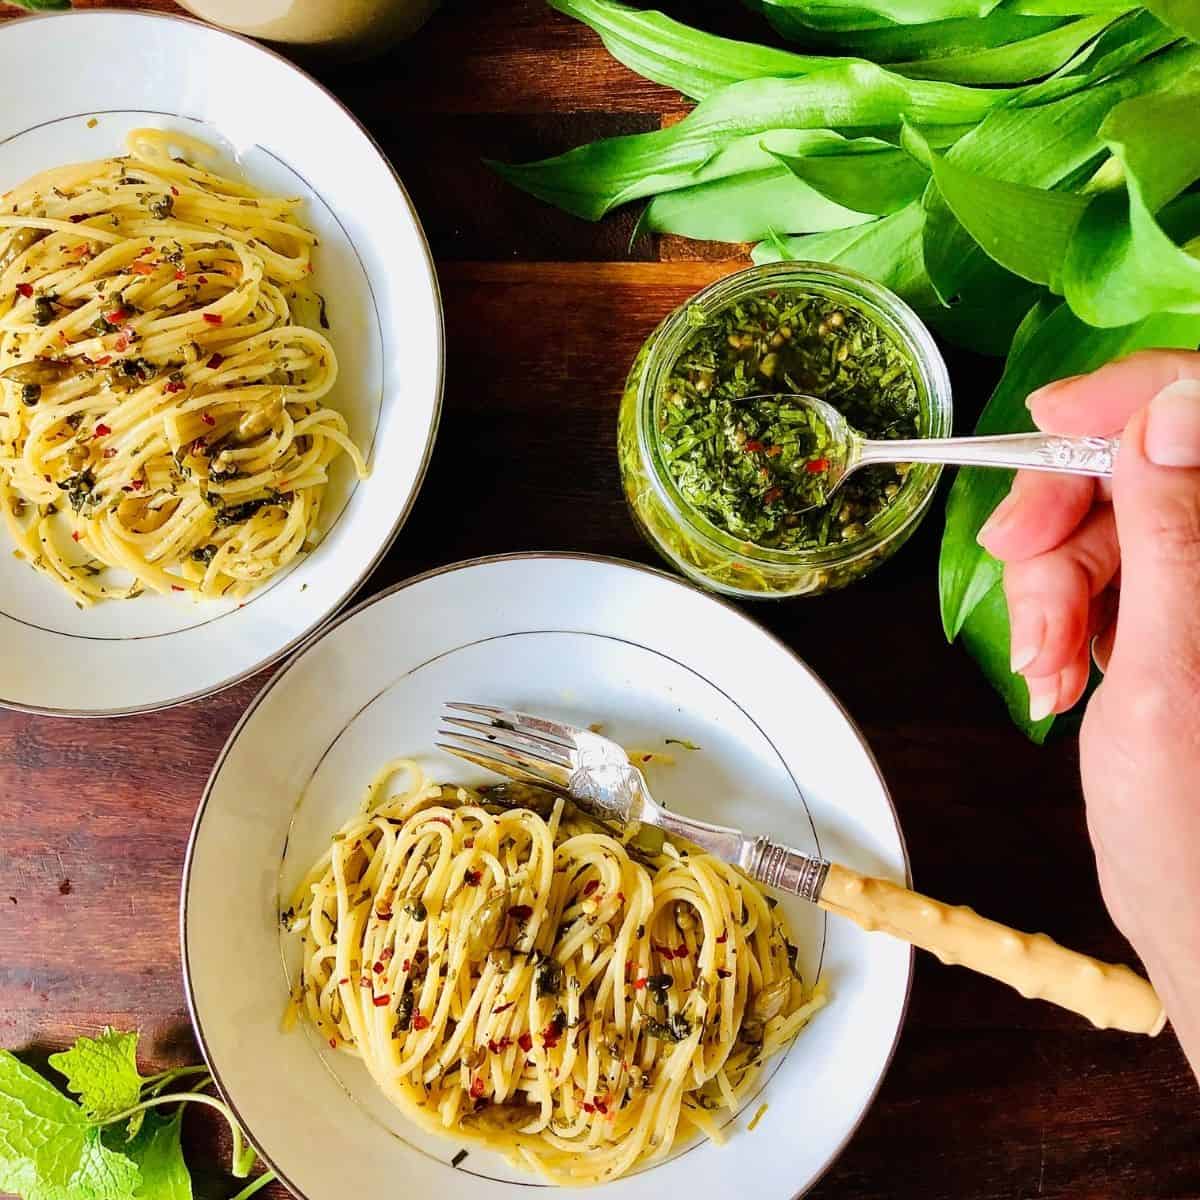 Plate of spaghetti with wild green salsa verde and a jar of wild green salsa verde